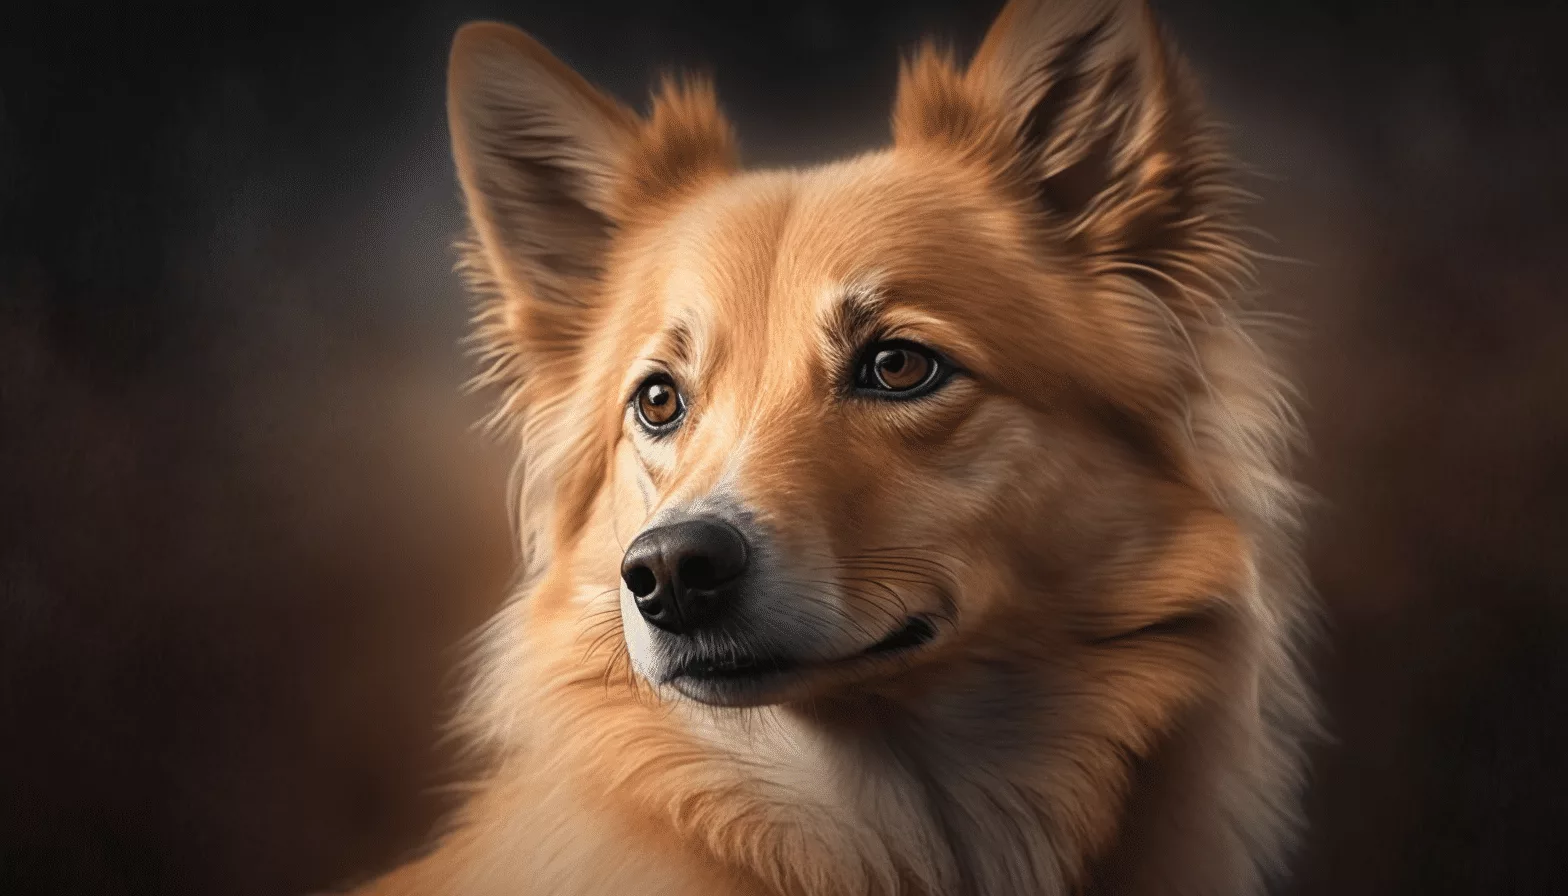 A painting of a brown dog looking at the camera.